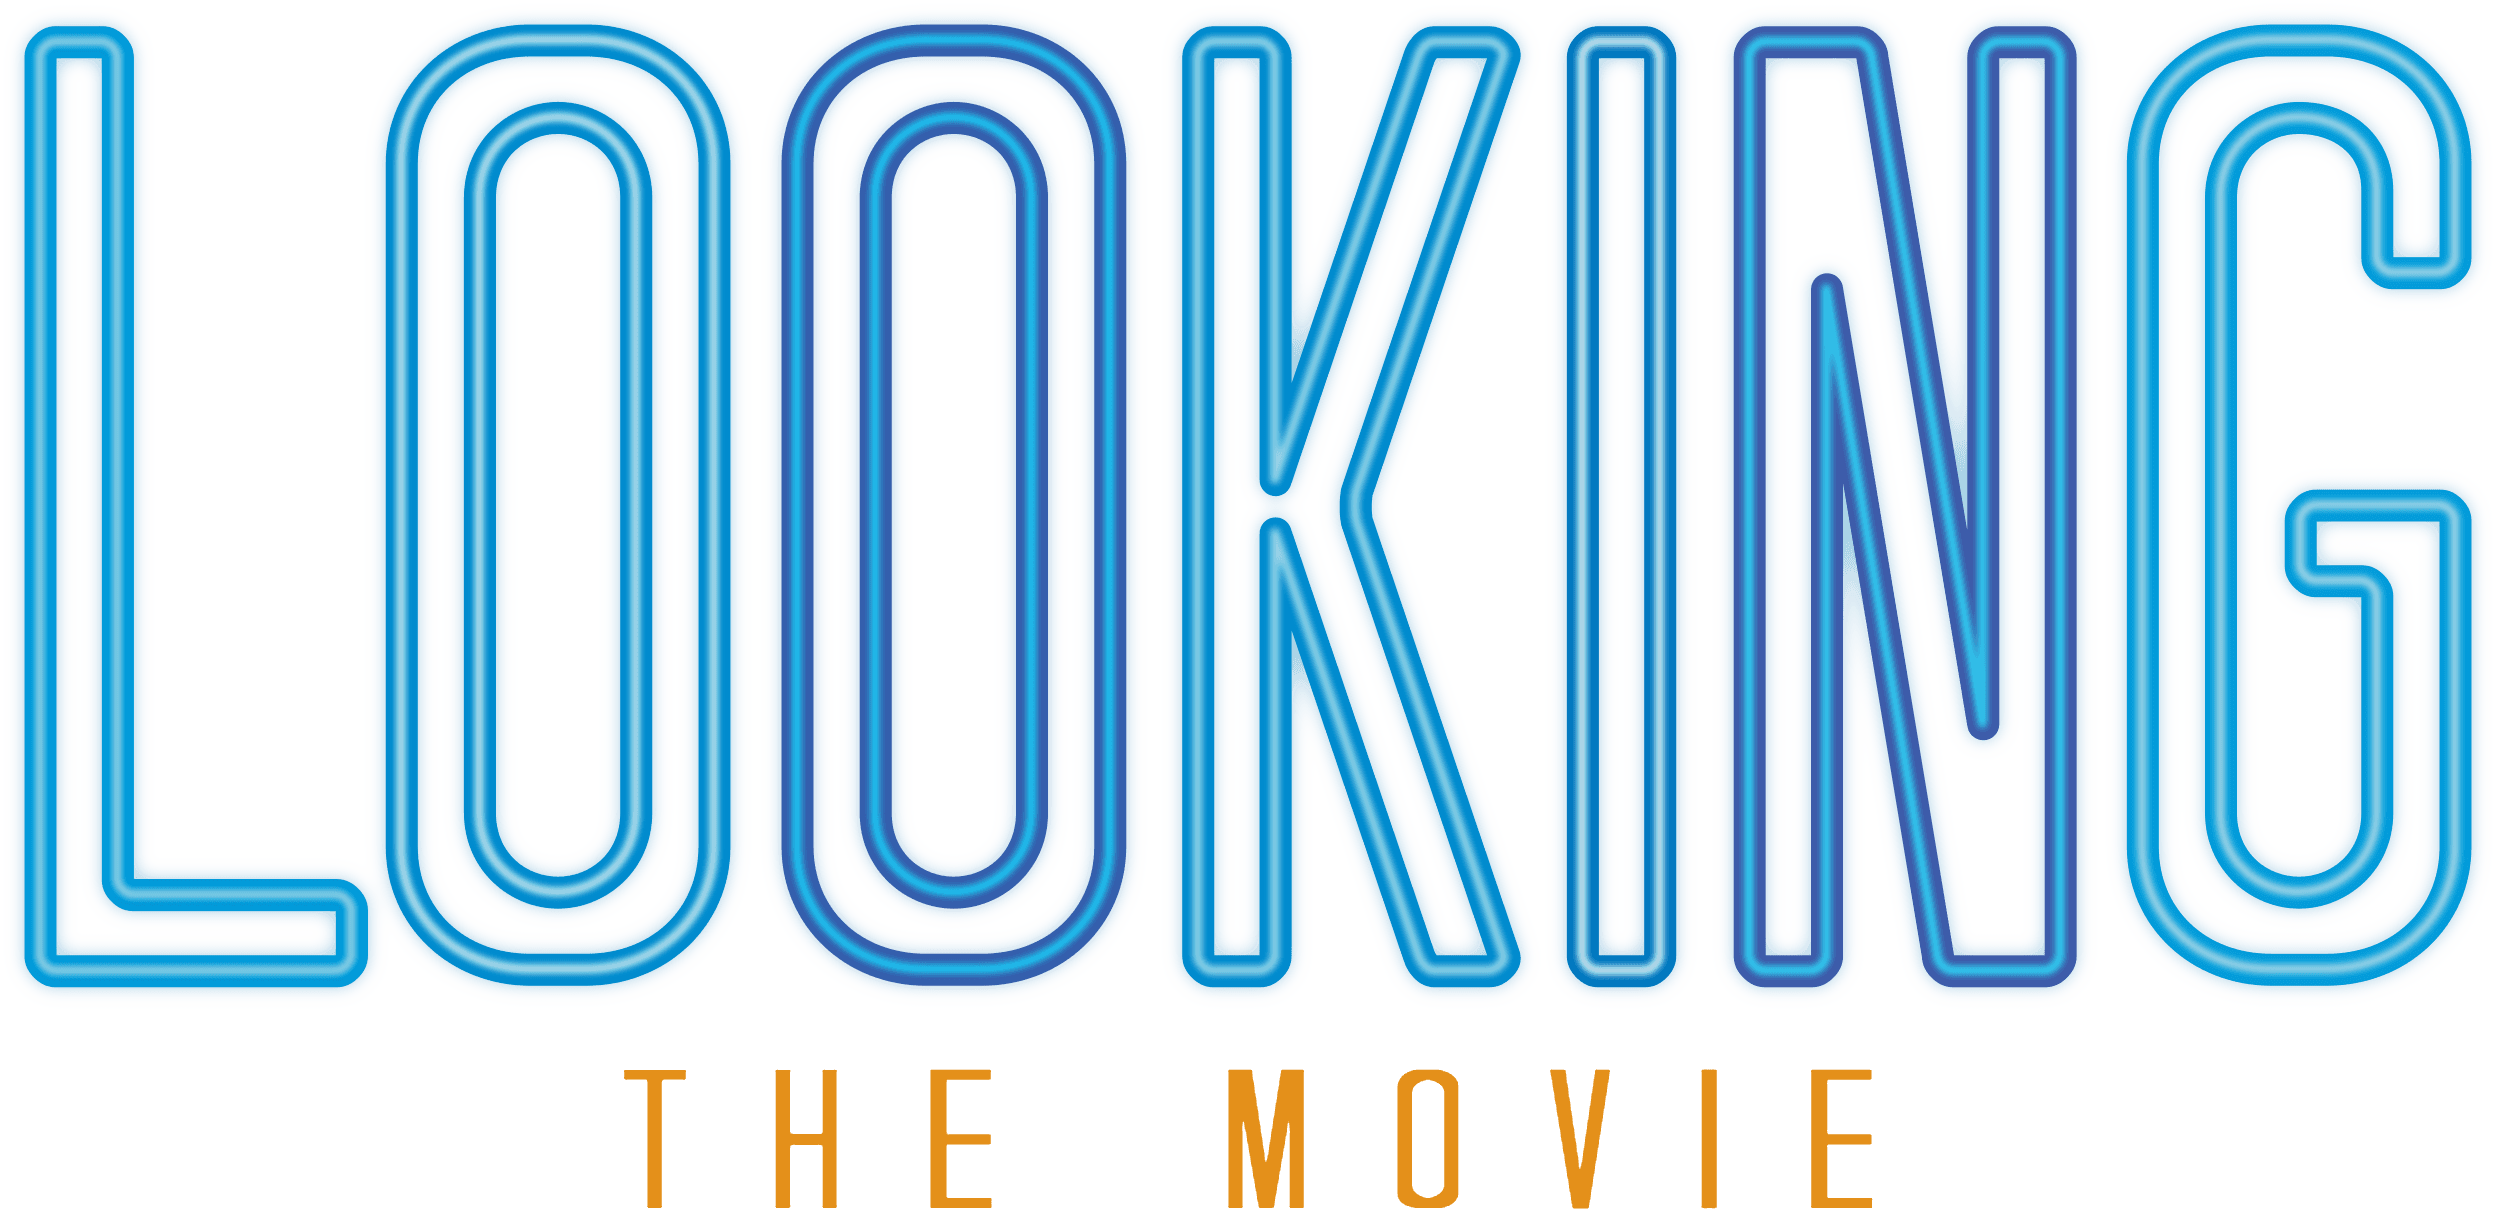 Looking: The Movie logo